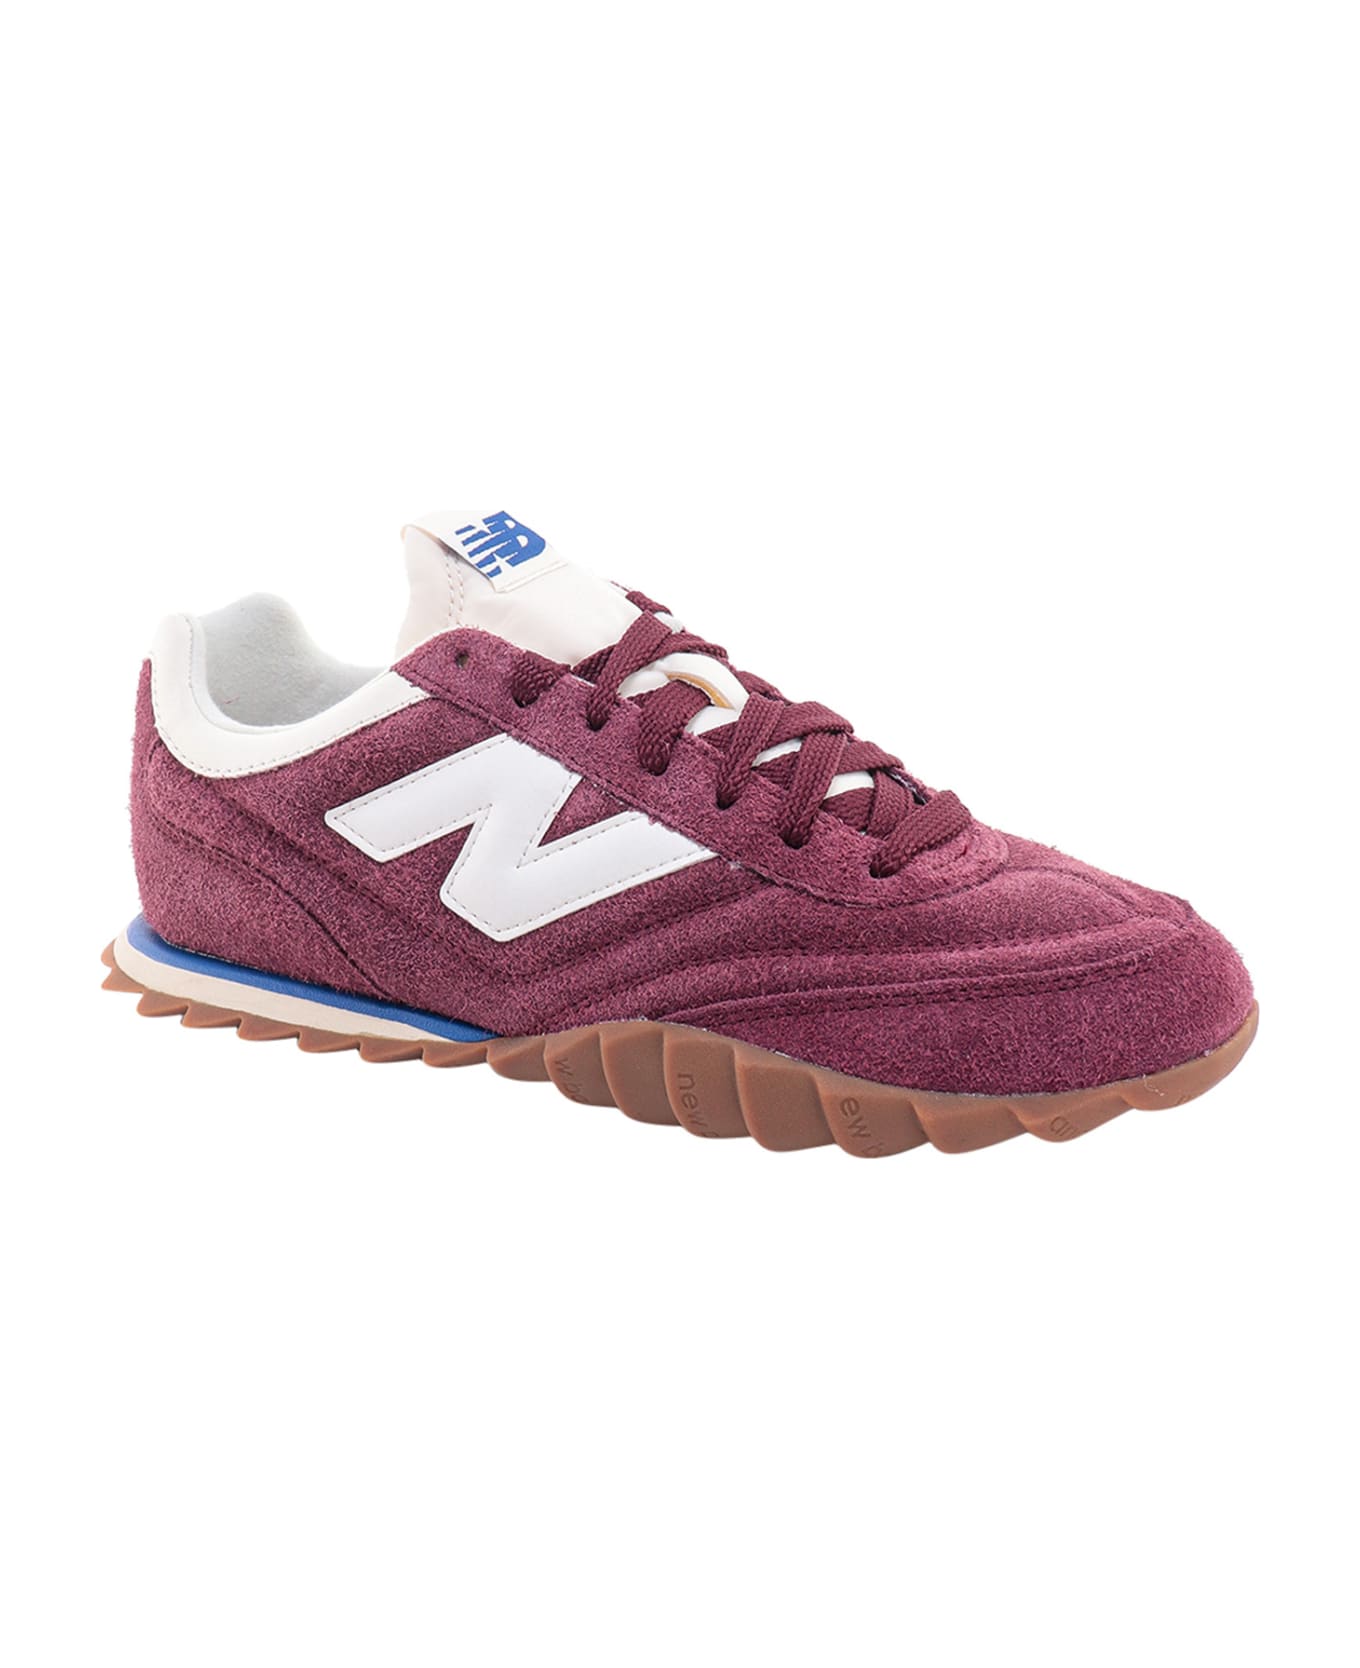 New Balance Sneakers - Red